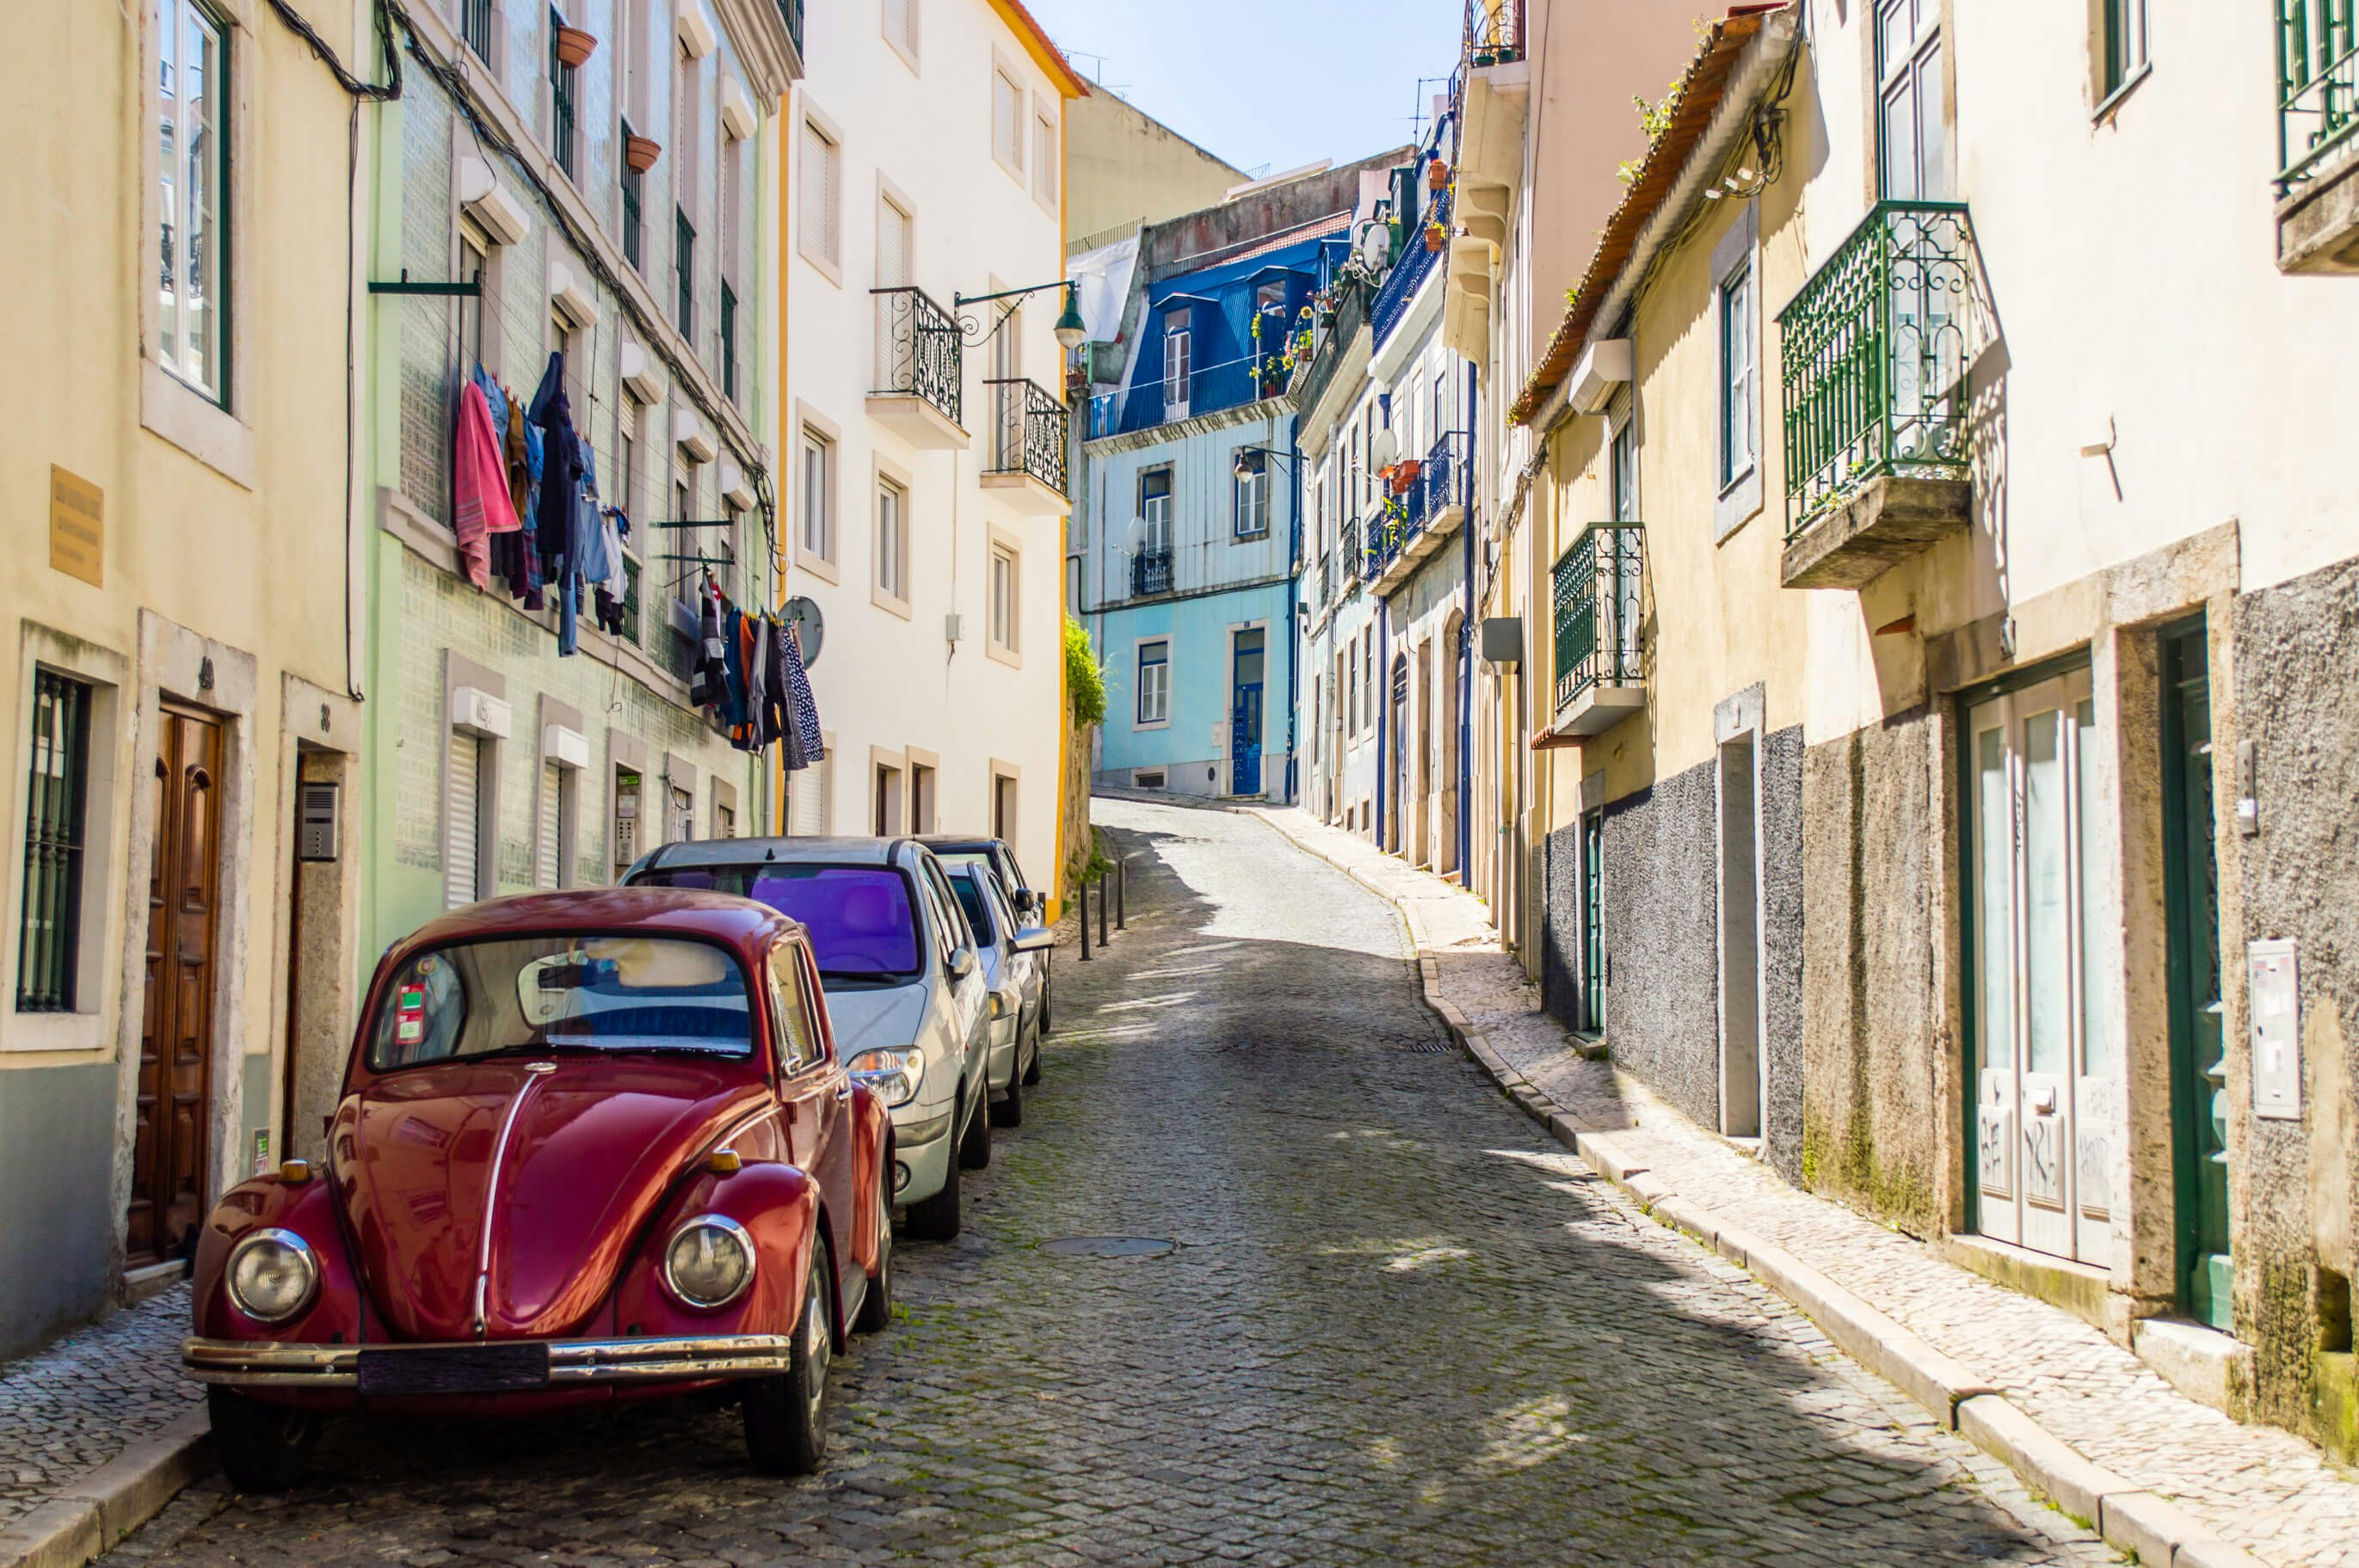 Cobblestoned winding street with old classic vintage beetle car in Lisbon